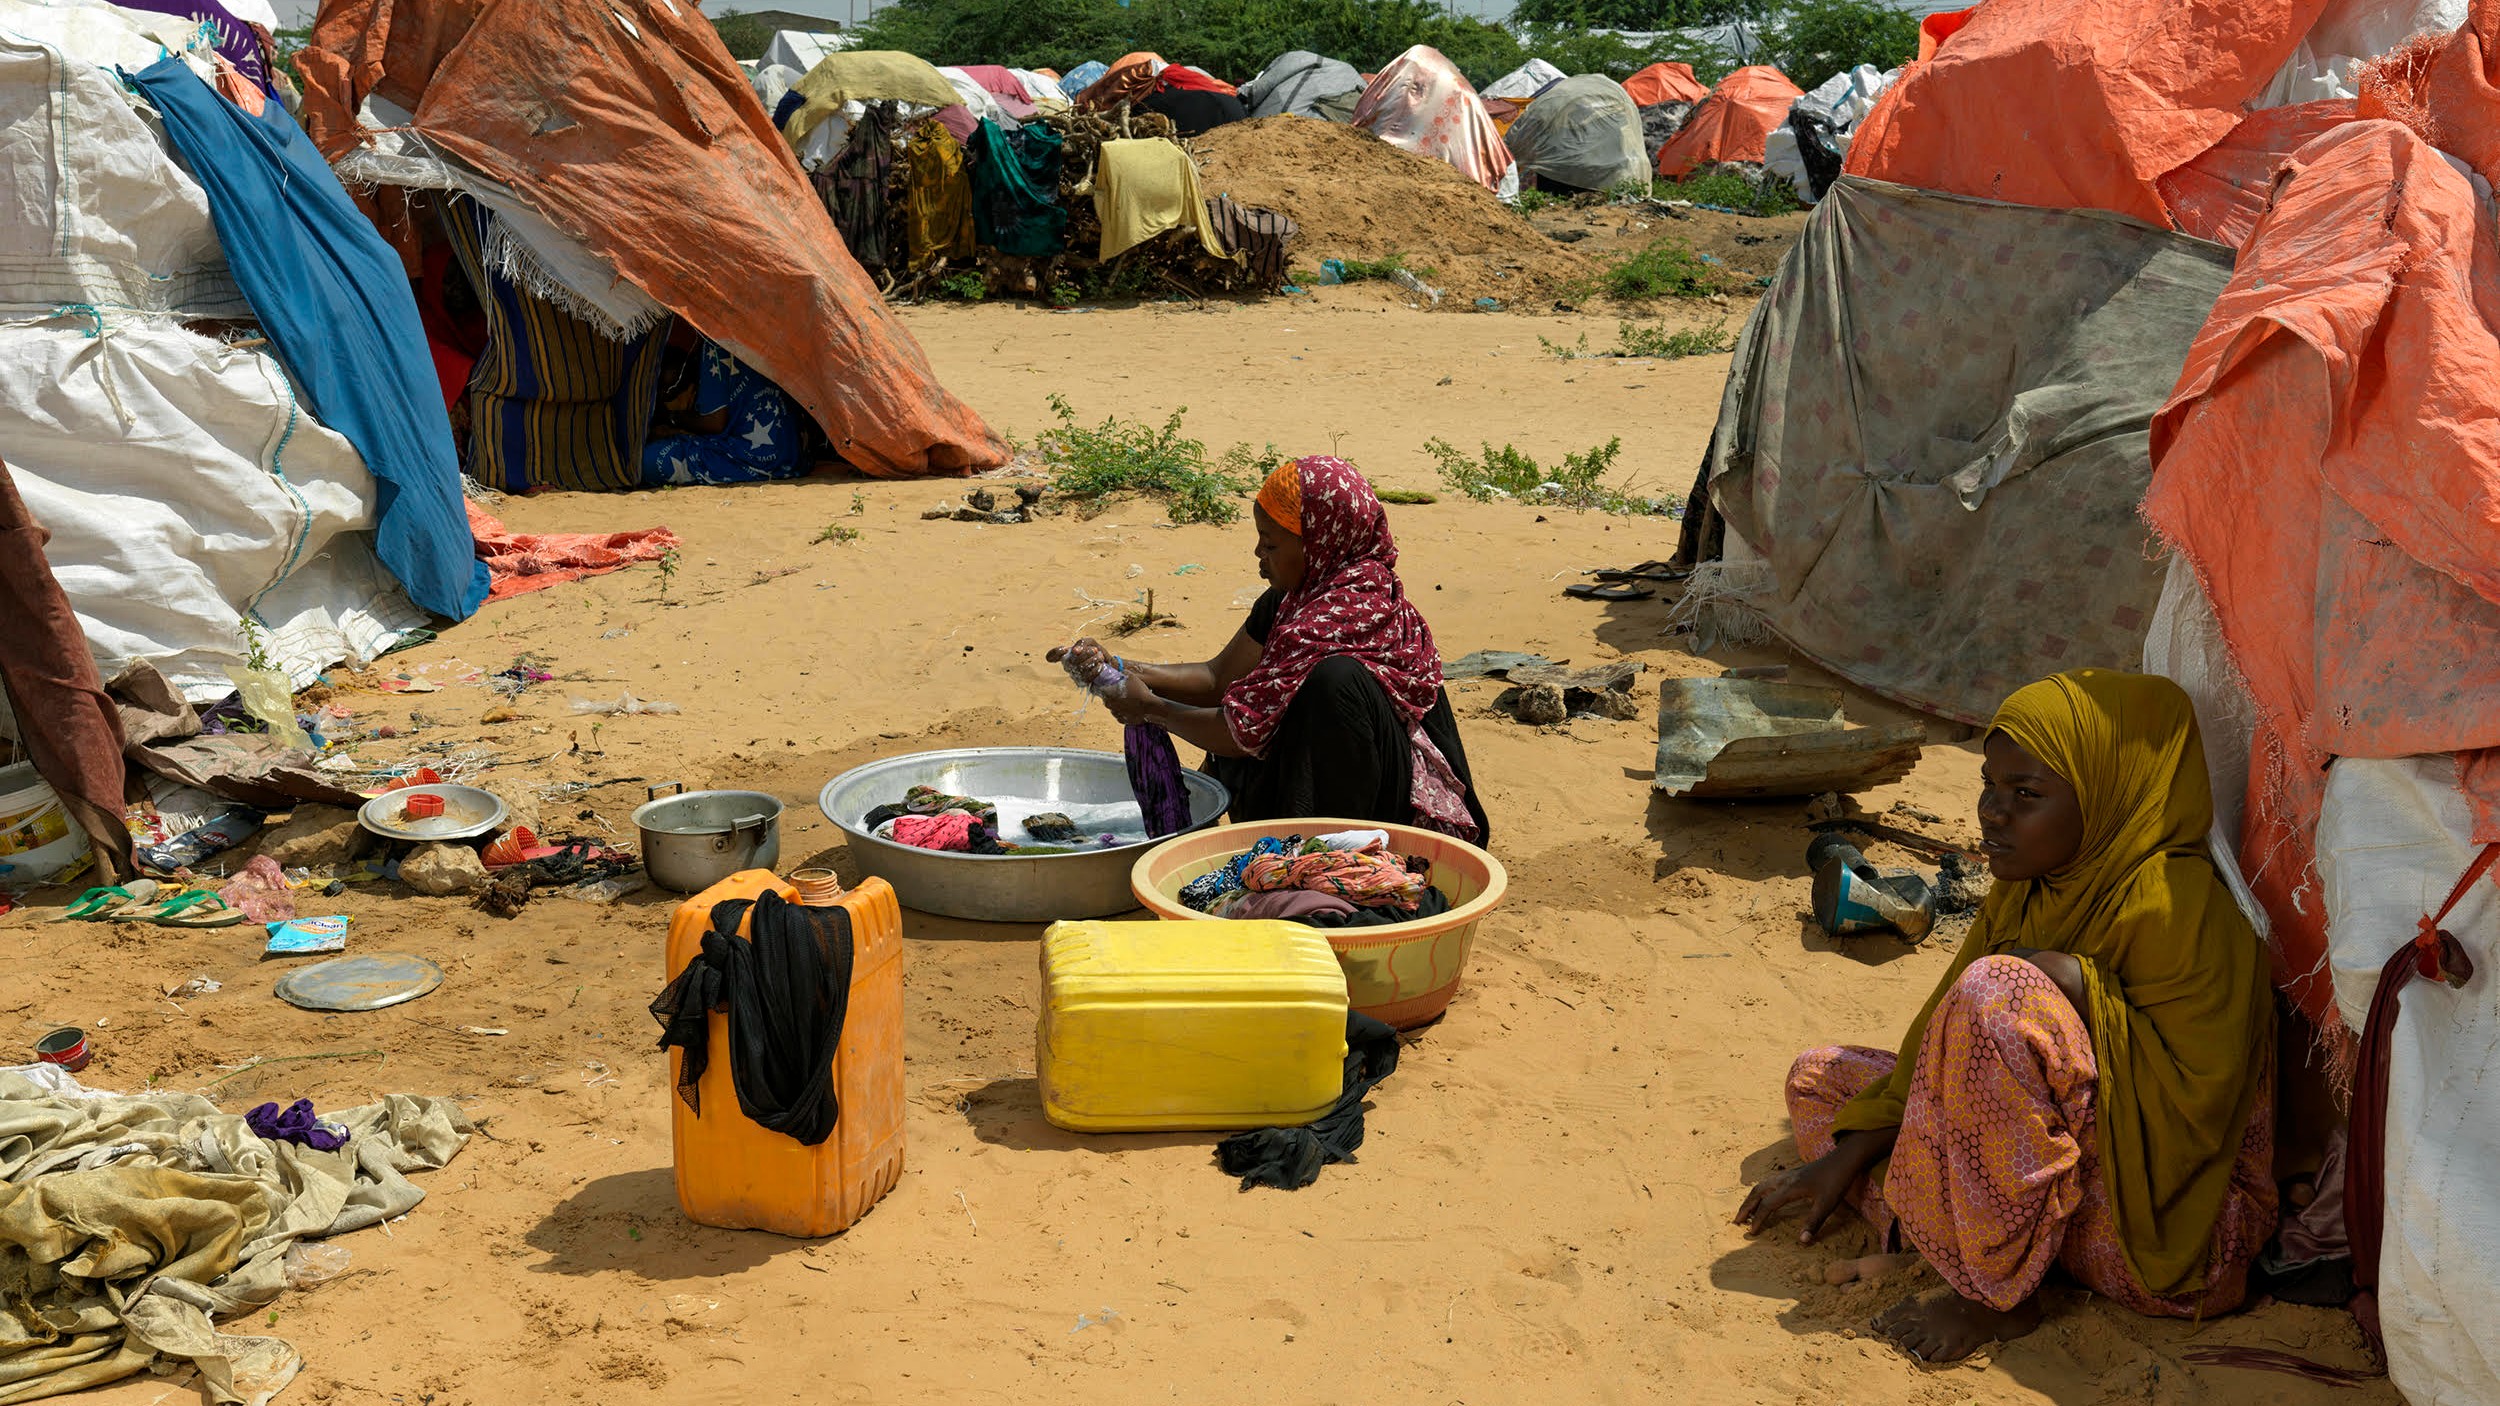 A woman washed clothes for internally displaced Somalis at a makeshift camp near the capital Mogadishu (MEE/Peter Caton)